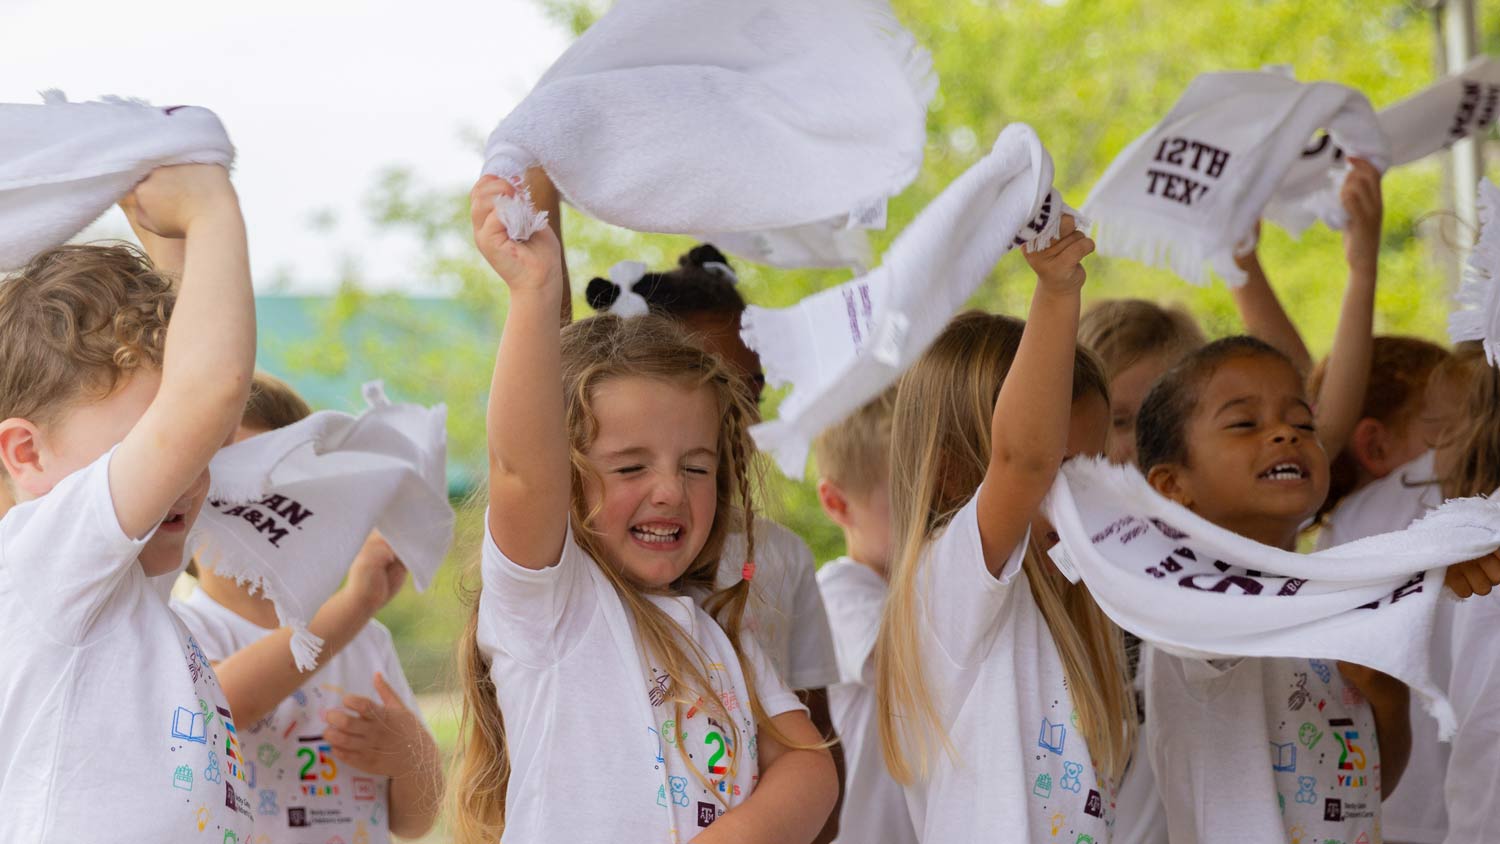 A group of pre-K students wave 12th Man towels at a children's event